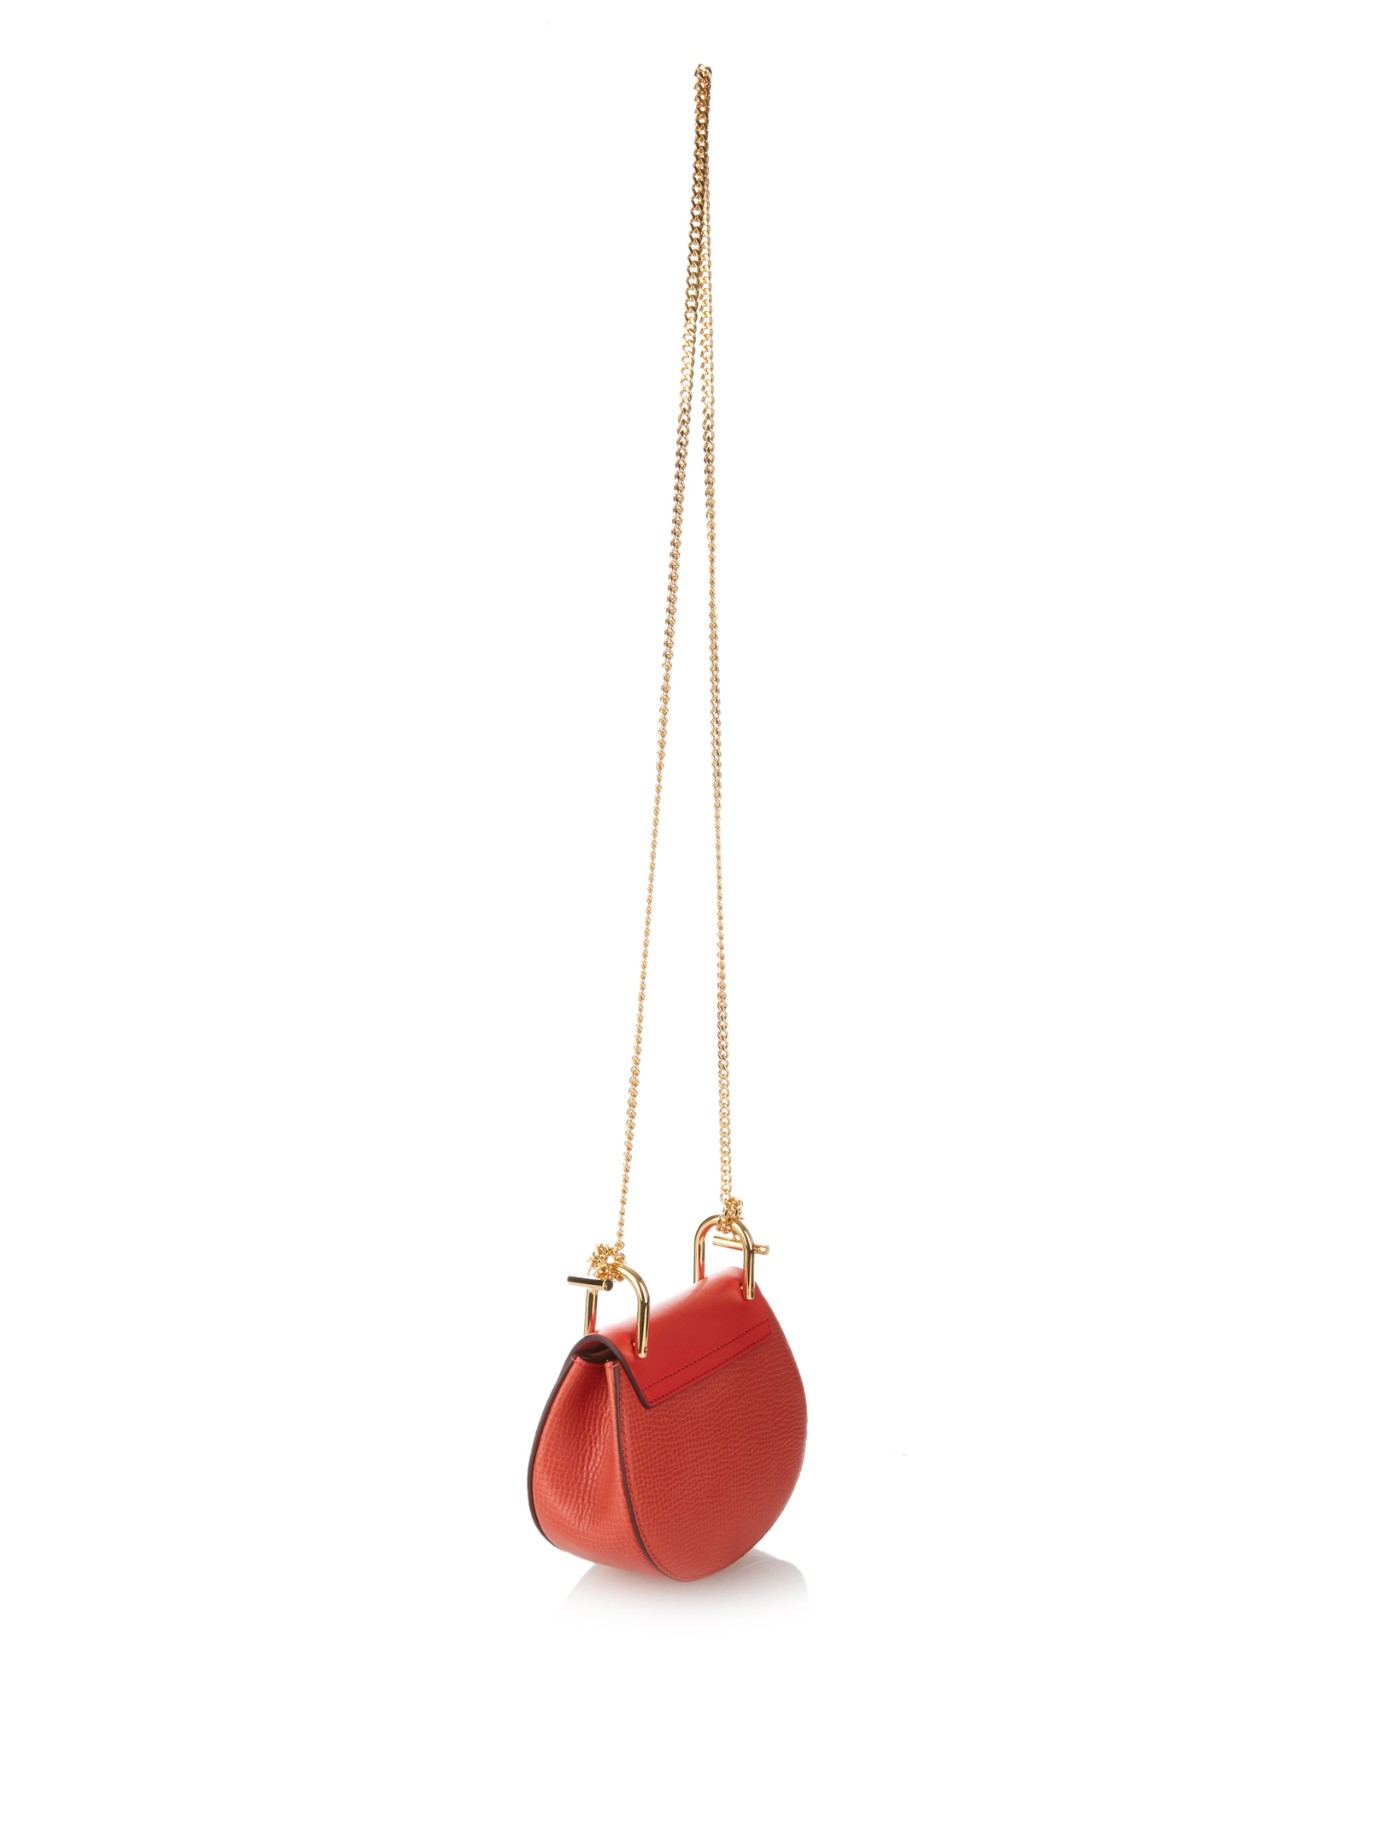 Chlo Drew Nano Leather Shoulder Bag in Red (RED MULTI) | Lyst